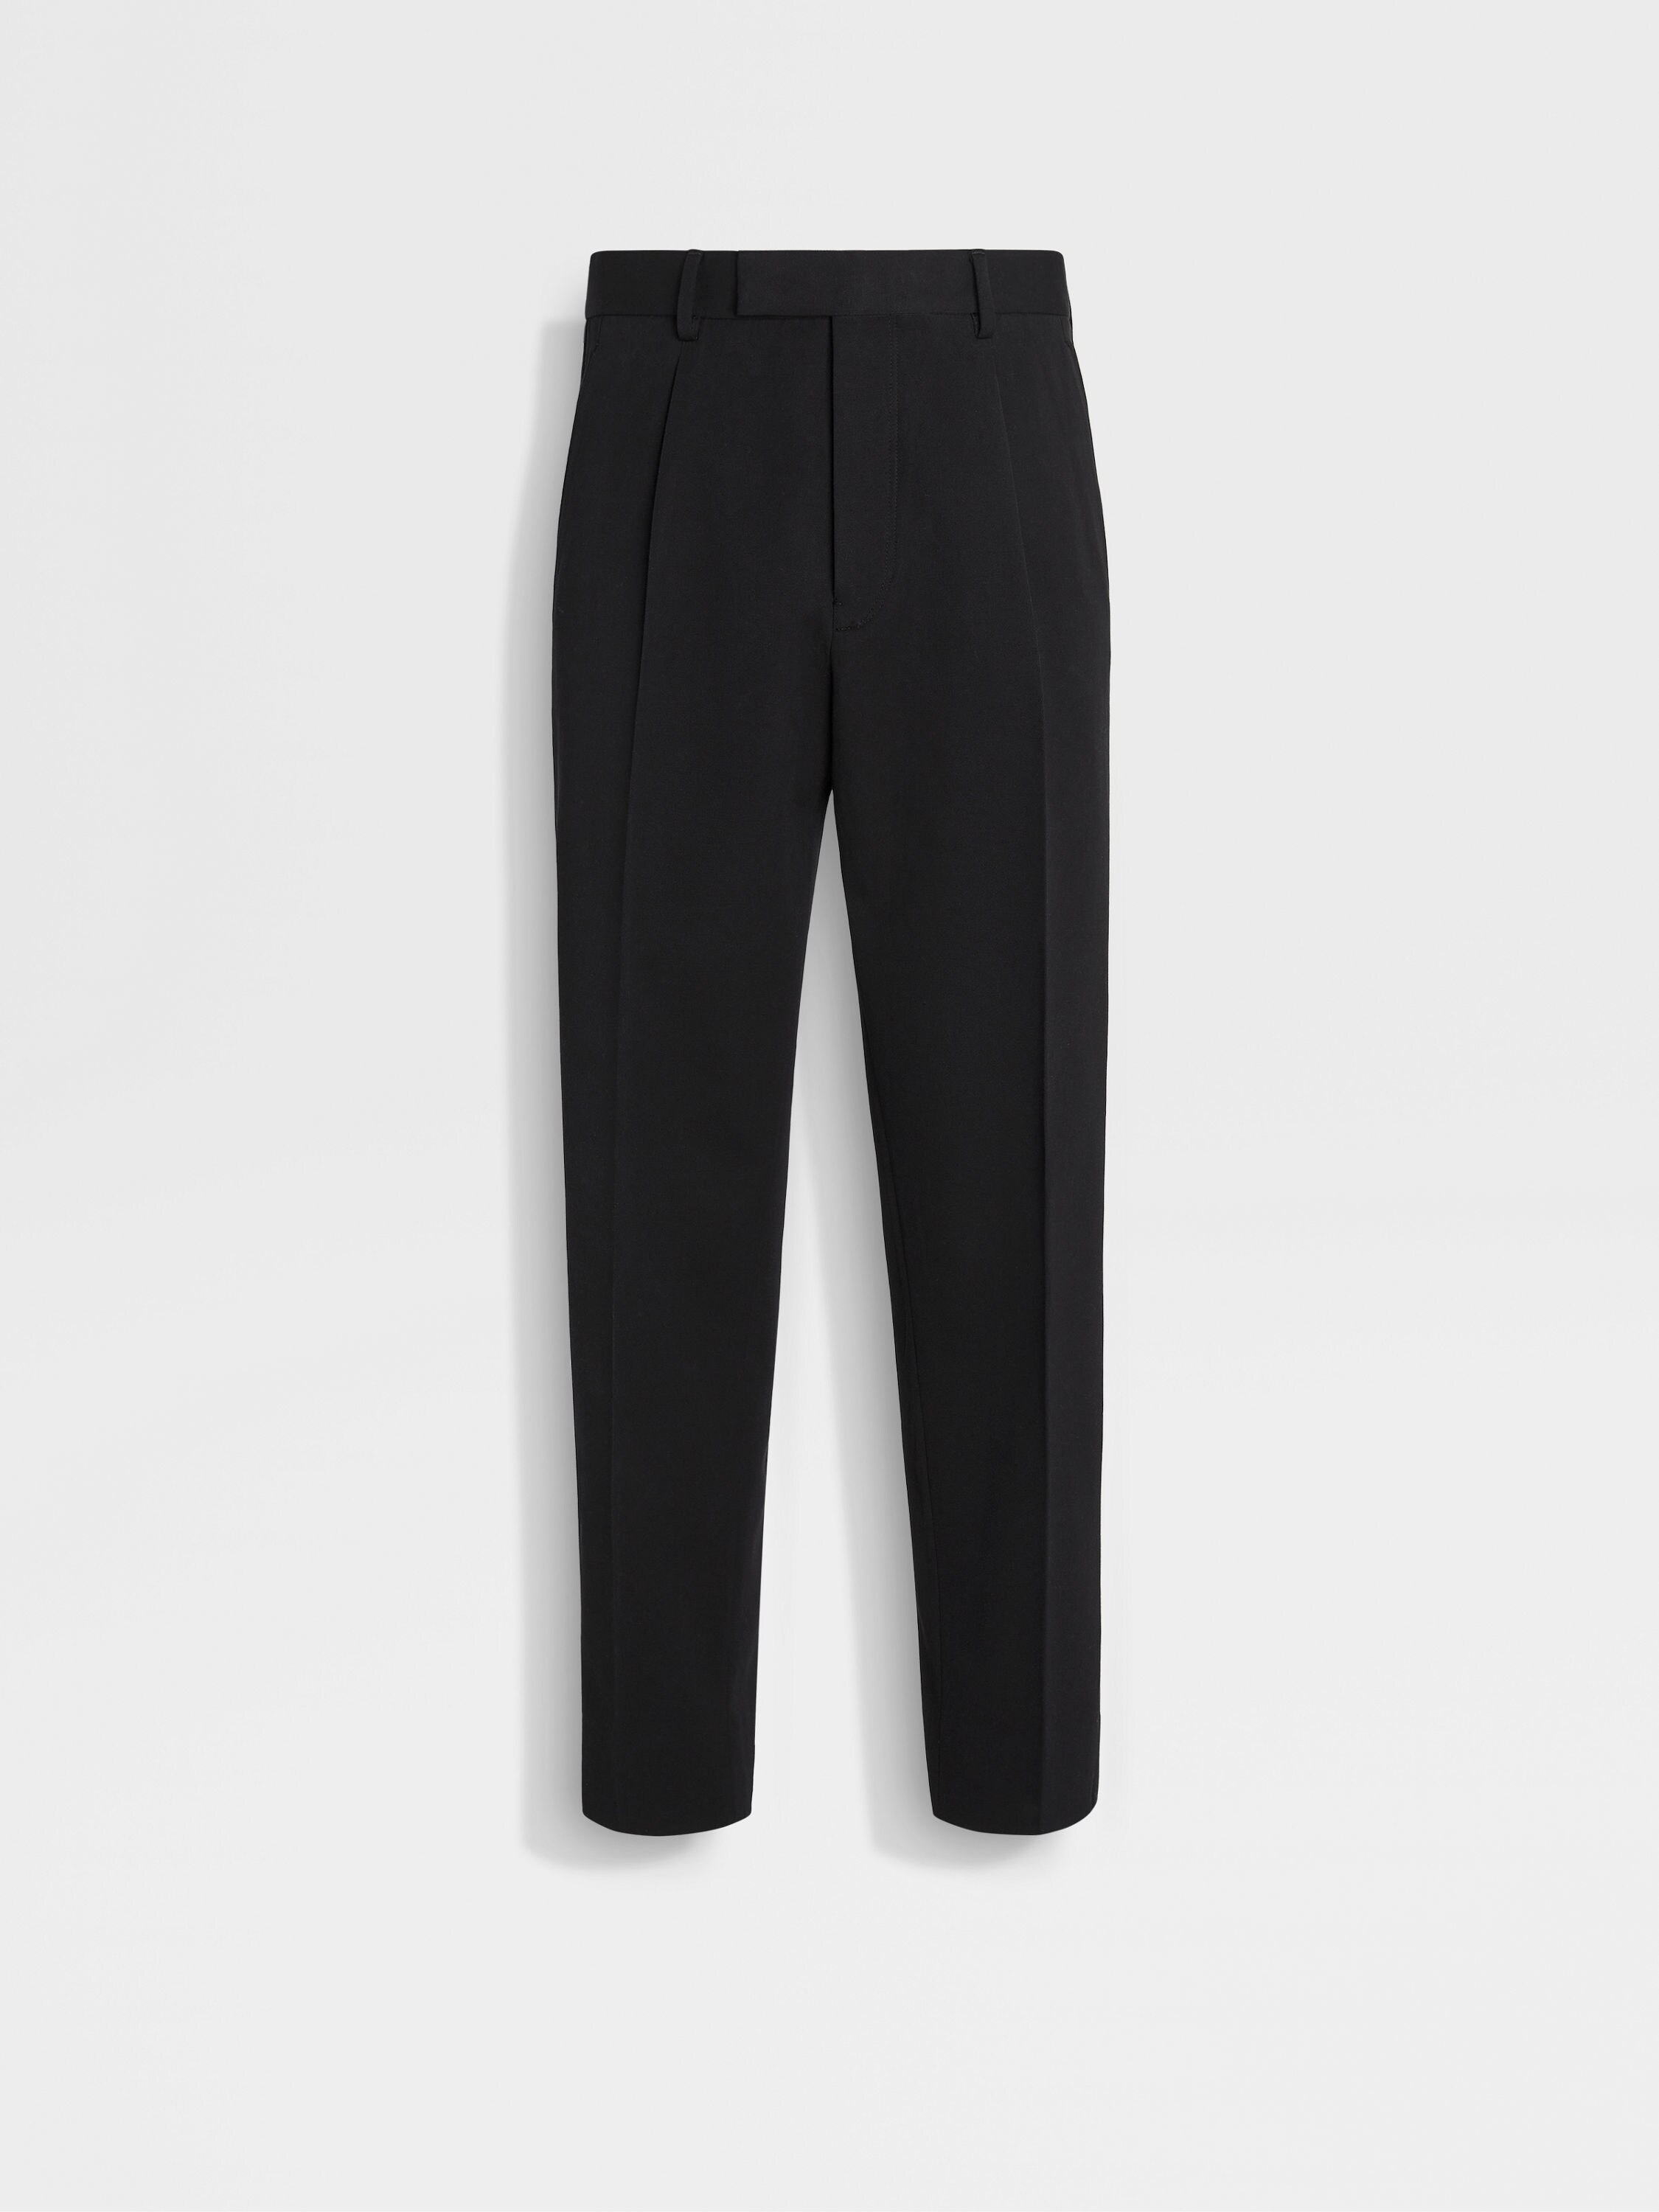 Black Cotton and Wool Pants SS24 29999696 | Zegna SI